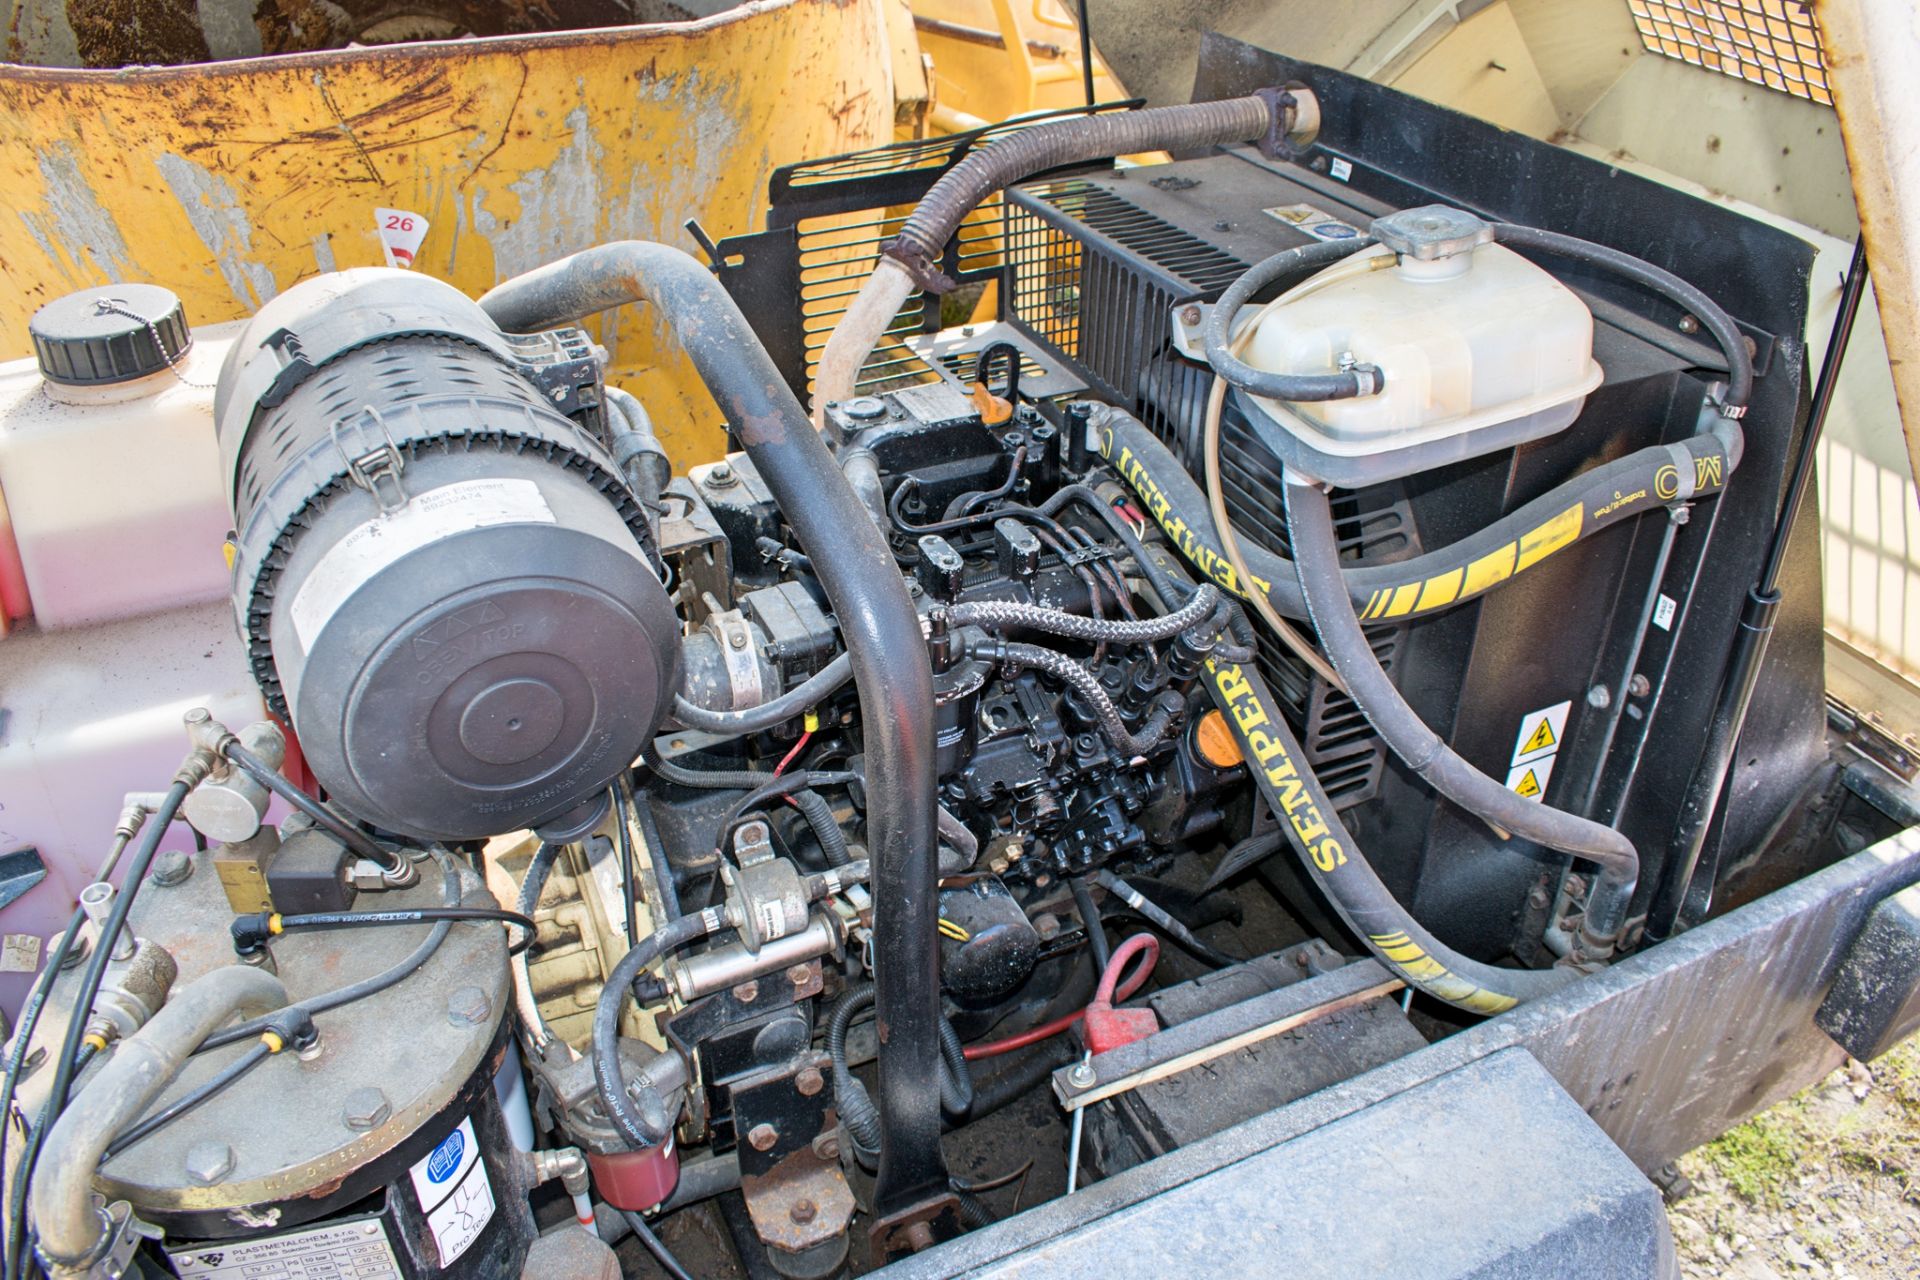 Ingersoll Rand 726 diesel driven mobile air compressor Year: 2010 S/N: 108584 Recorded Hours: 959 - Image 3 of 3